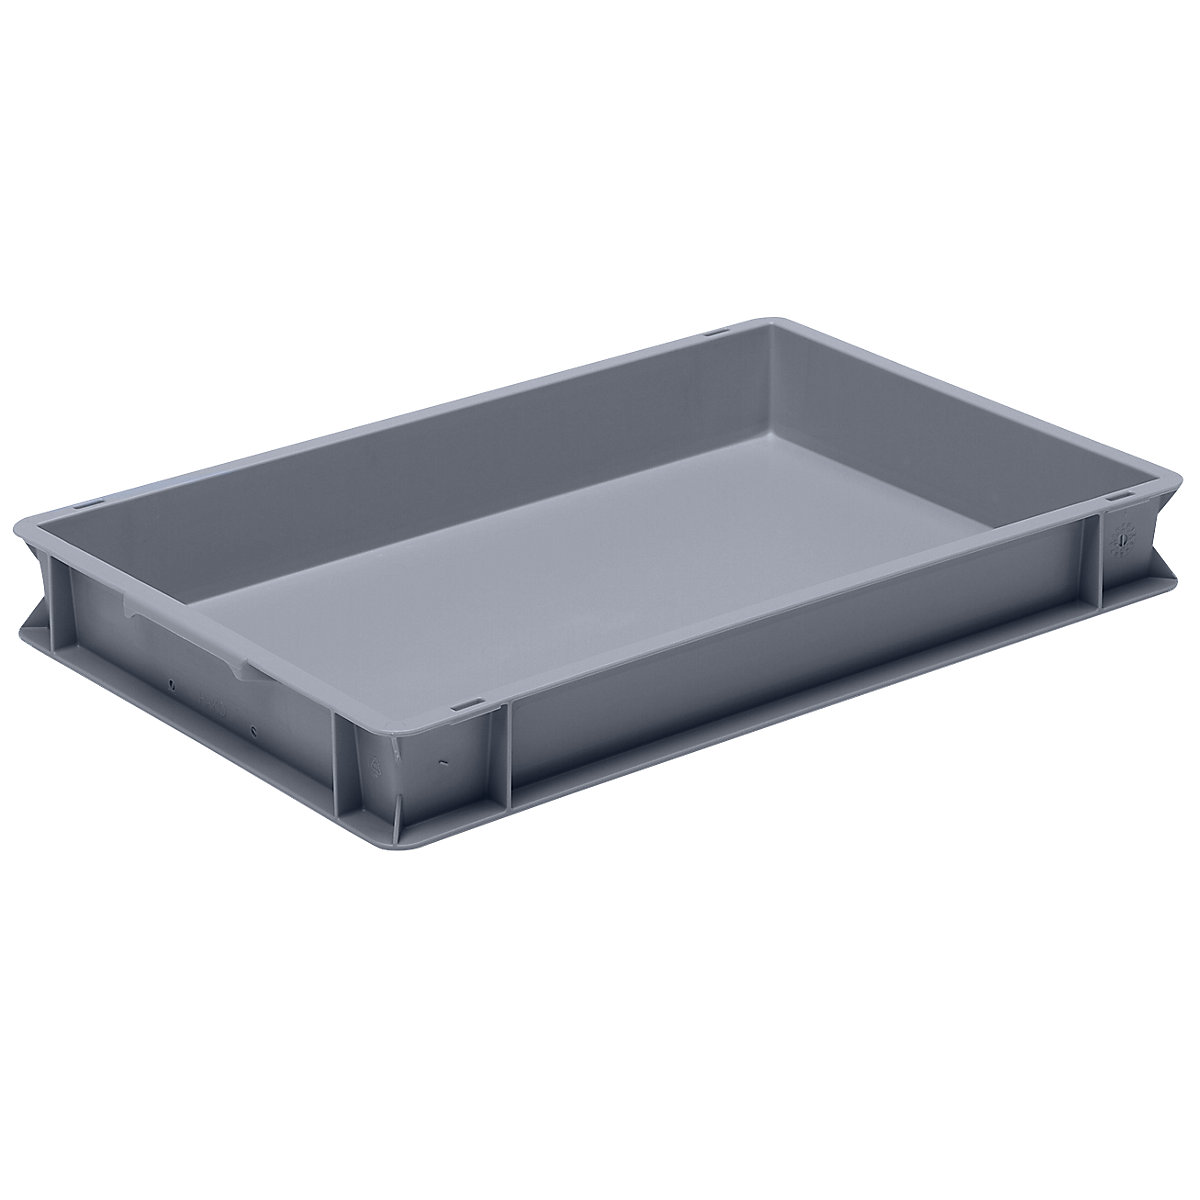 Euro stacking container made of polypropylene (PP), max. load 20 kg, silver grey, capacity 14 l, external height 75 mm, pack of 4